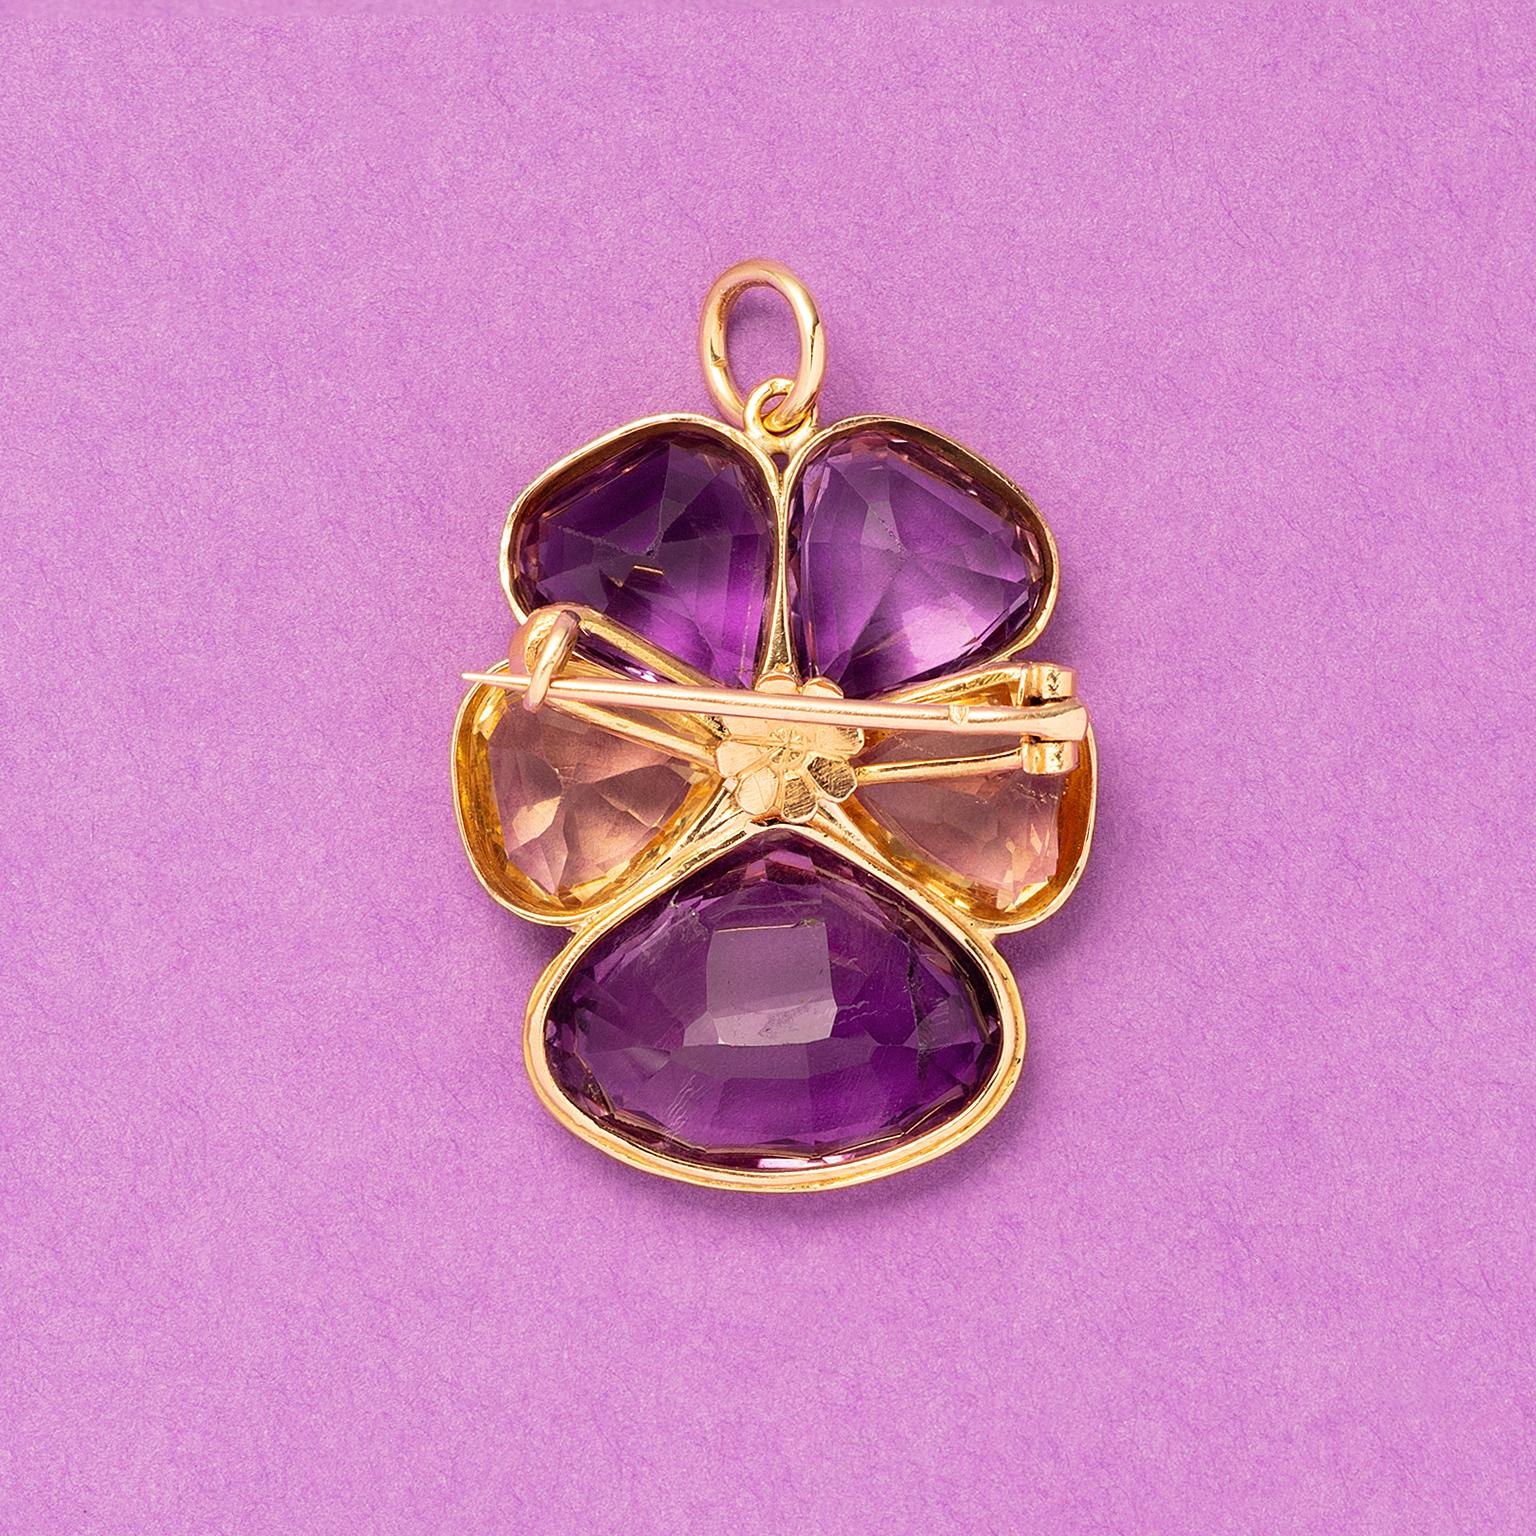 Georgian Gold pansy pendant or brooch with diamond, citrine and amethyst For Sale